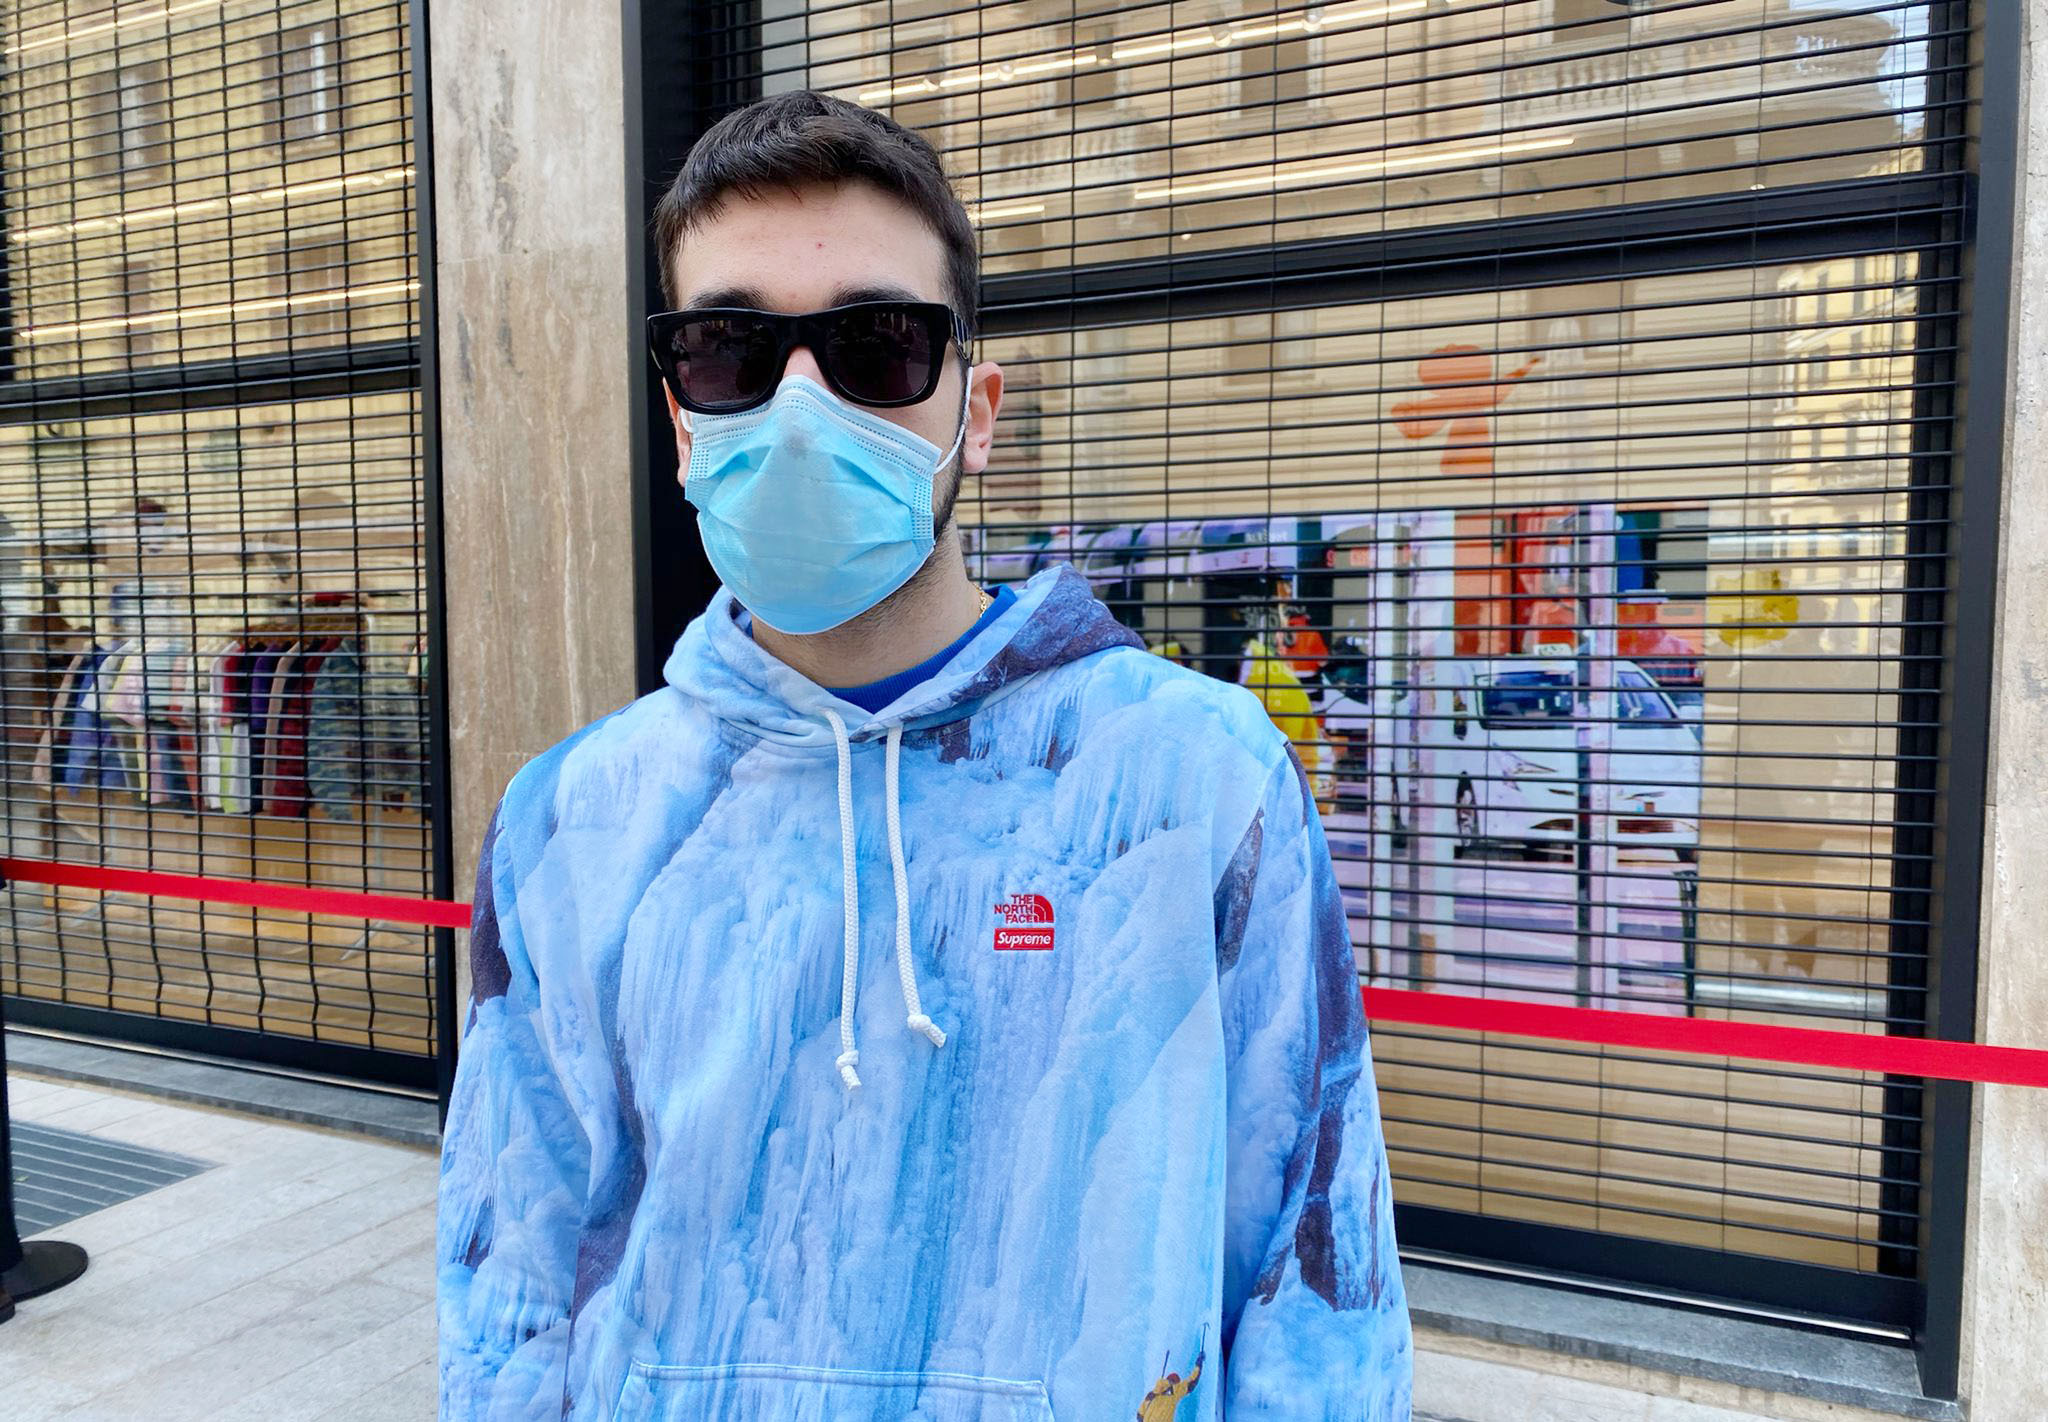 The first photos of the Supreme store in Milan